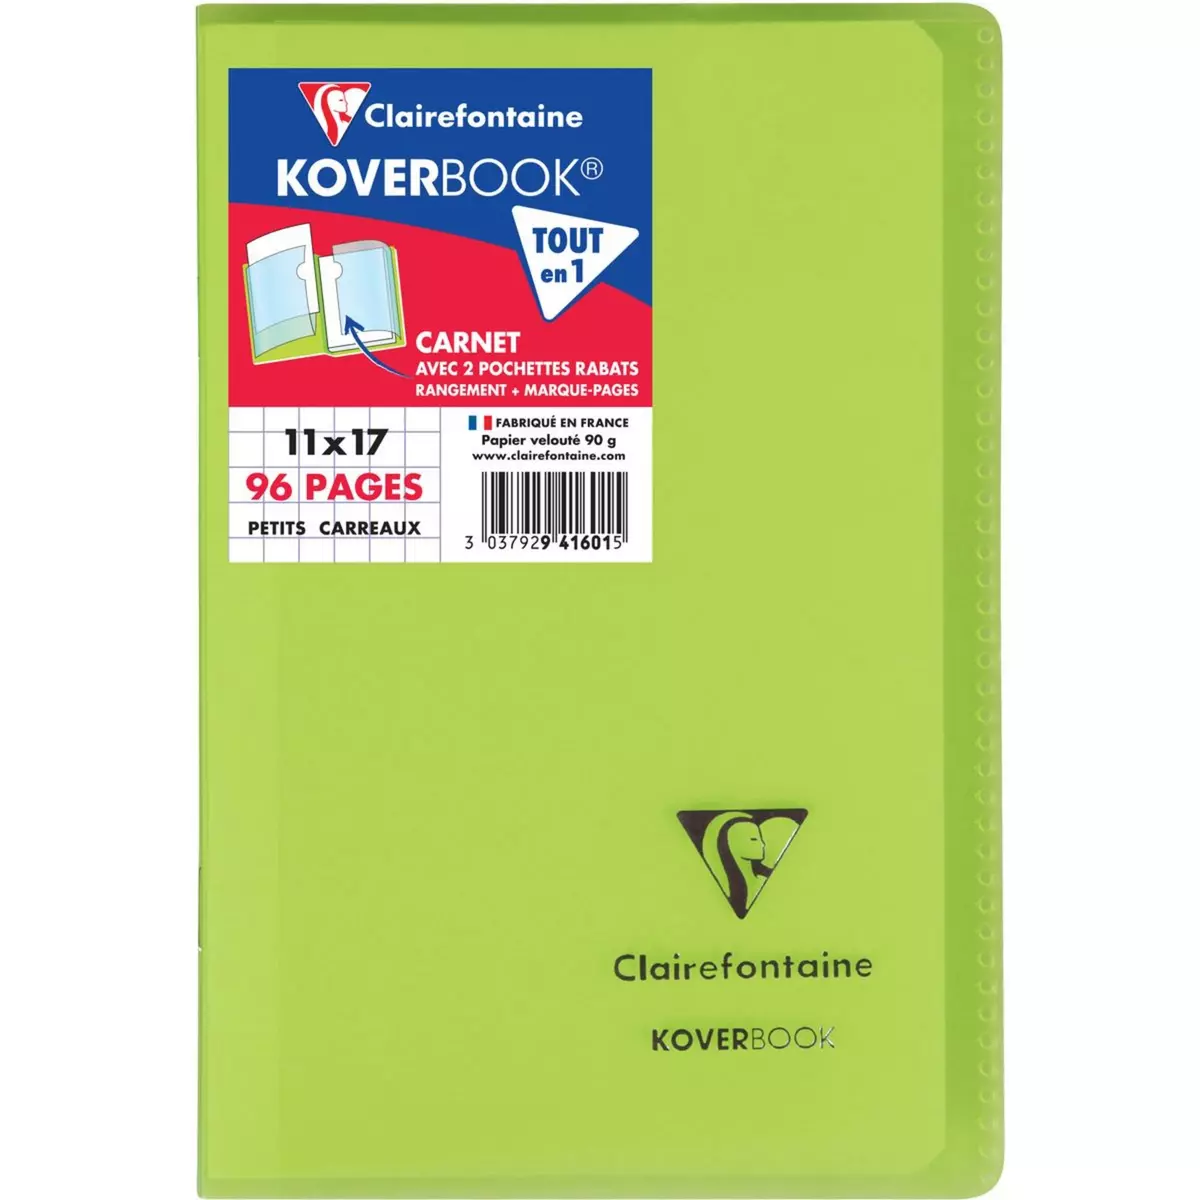 CLAIREFONTAINE Carnet piqûre petits carreaux Kover Book 110x170 96 pages Clairefontaine - Vert